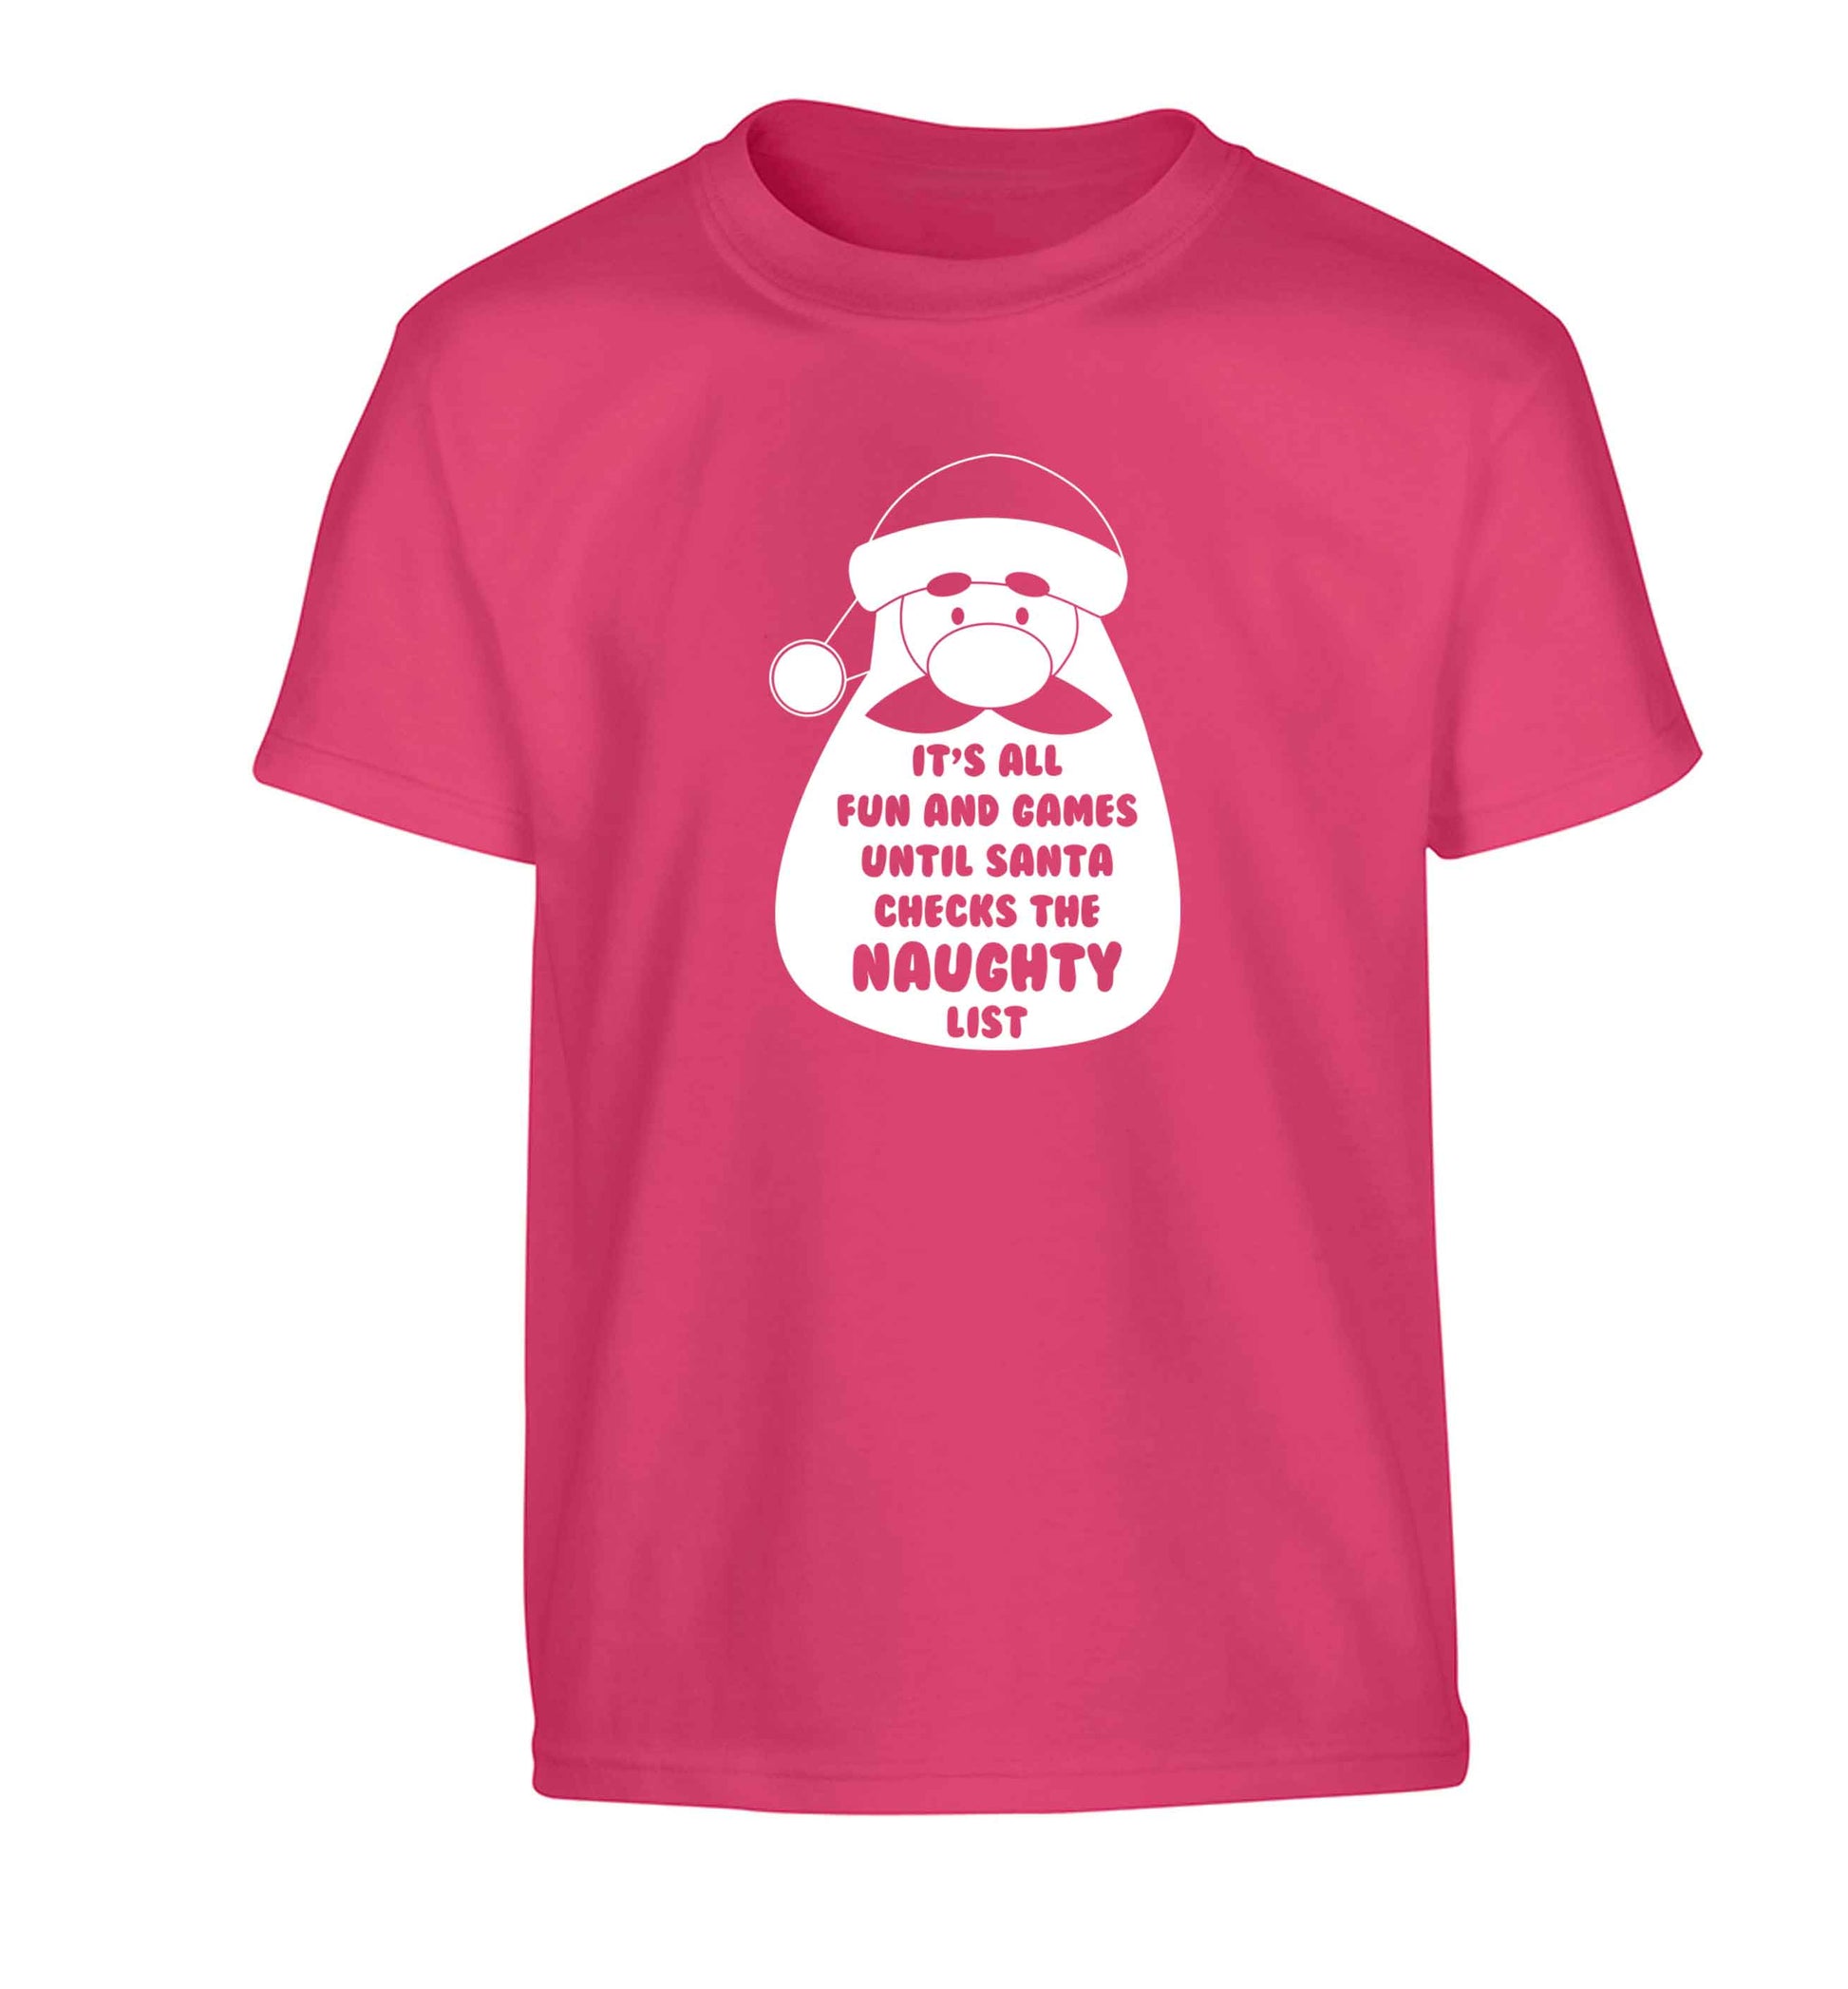 It's all fun and games until Santa checks the naughty list Children's pink Tshirt 12-13 Years